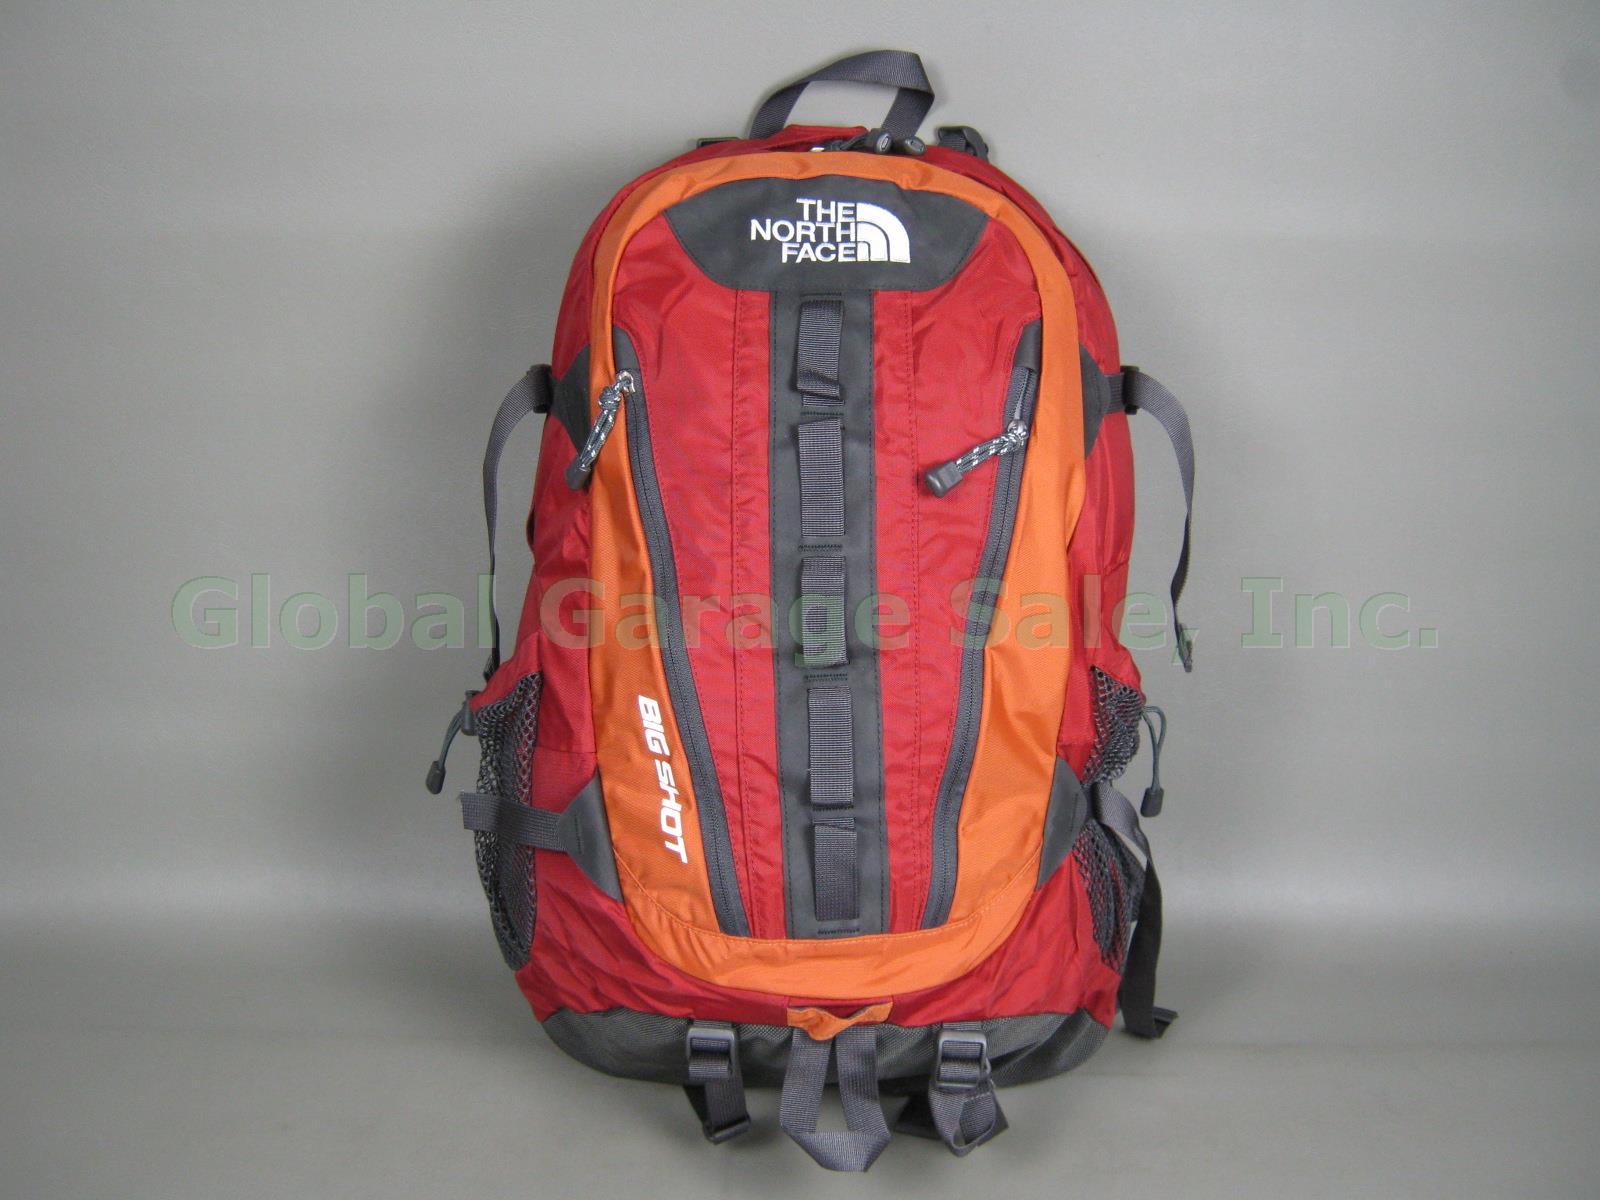 NEW NWT The North Face Big Shot Backpack Day Pack Laptop Book Bag Cardinal Red